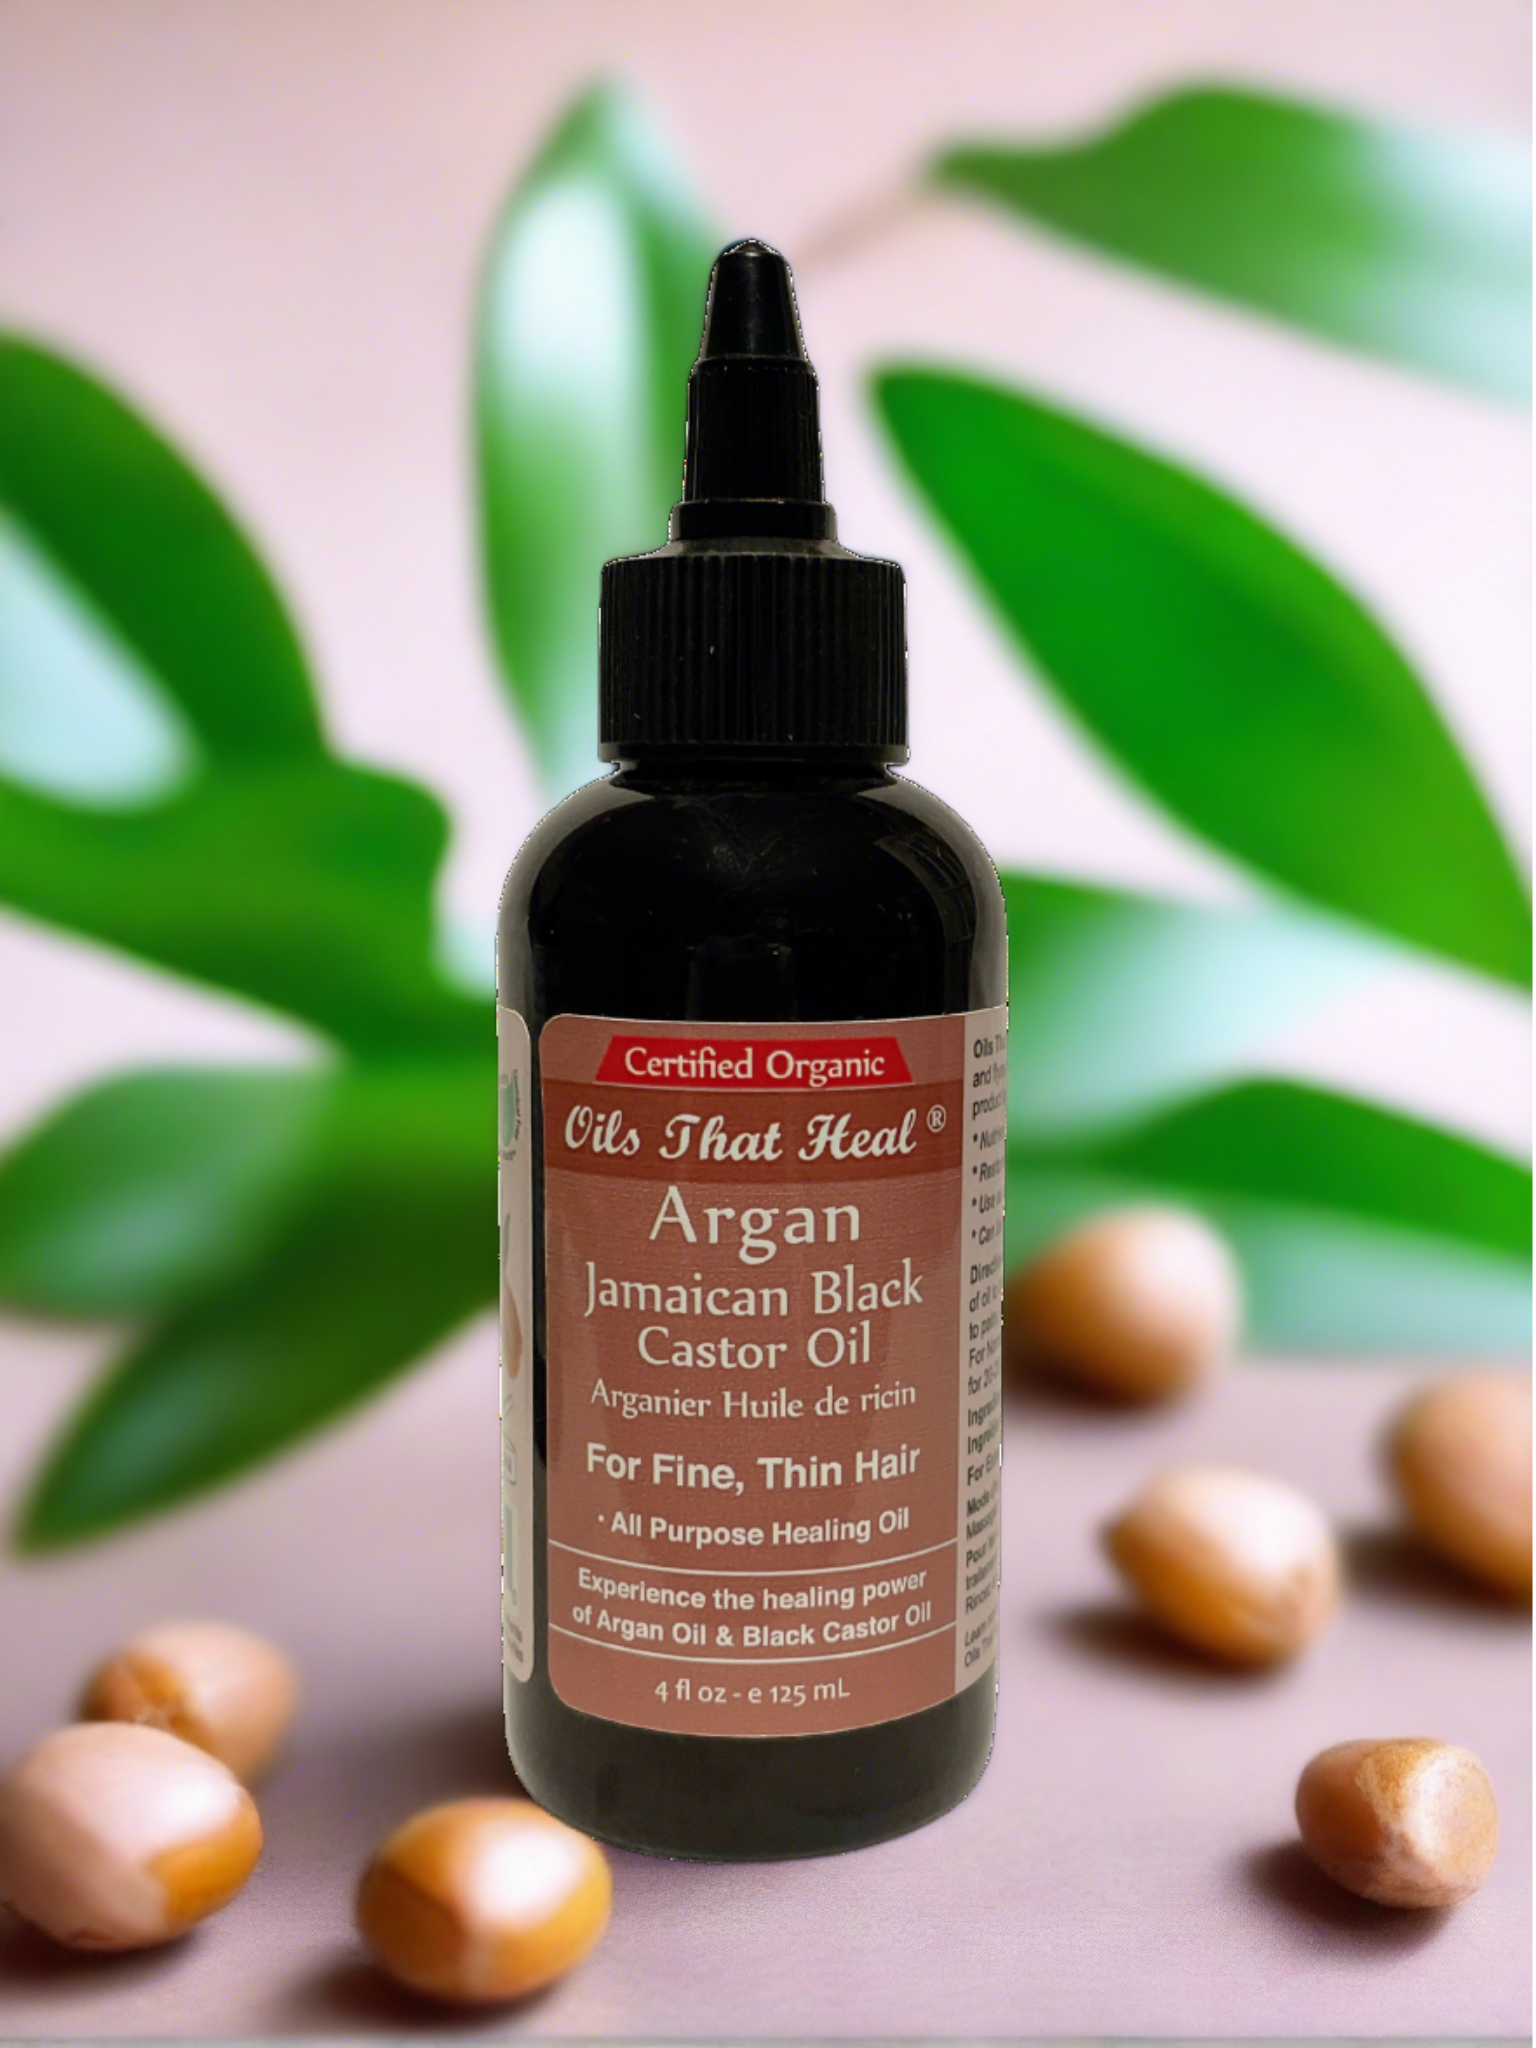 jamaican black castor oil for hair growth, real Moroccan argan oil, oilblends, organic oils for thinning hair, soaps that heal, all natural and organic hair products